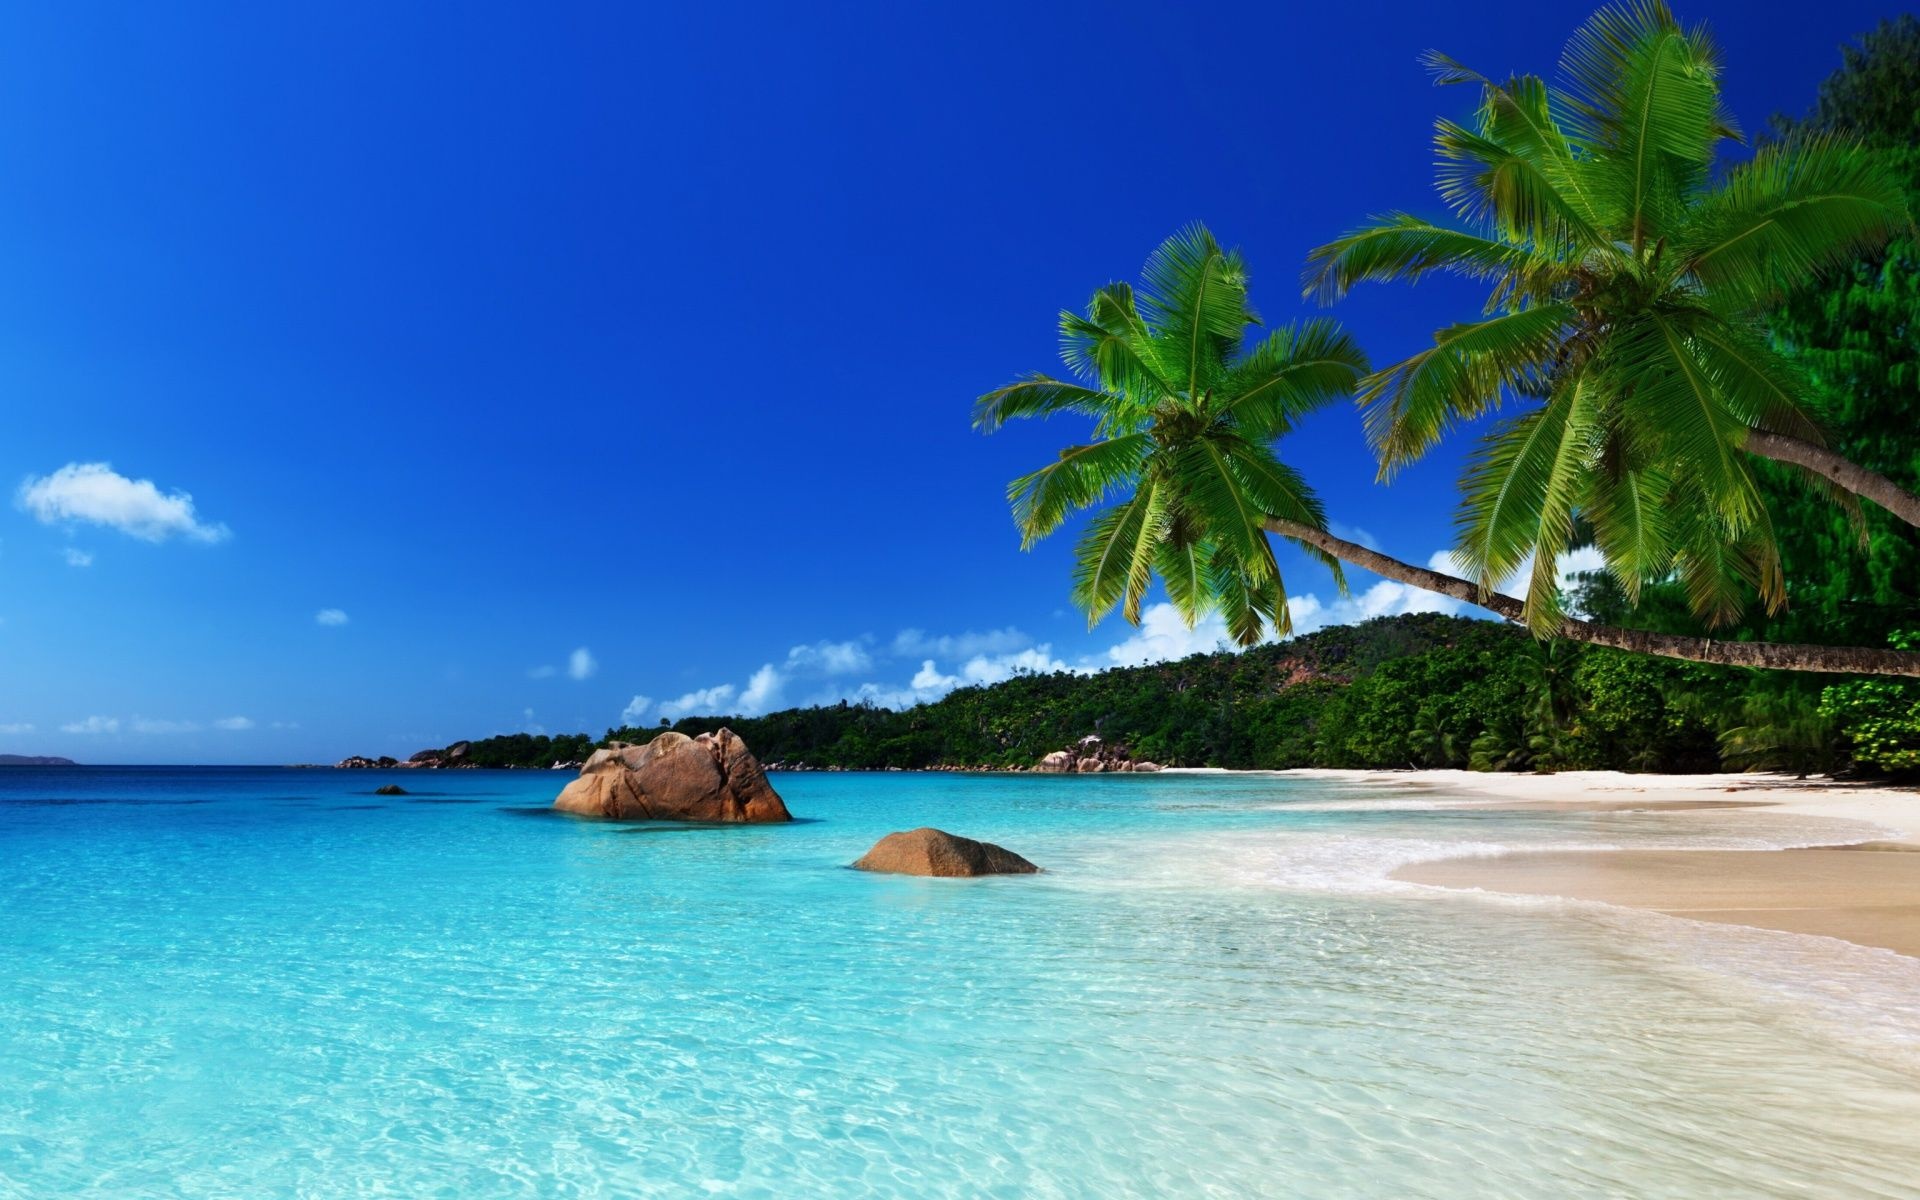 Caribbean Islands: Jamaica, The Greater Antilles, The West Indies, Beach. 1920x1200 HD Background.